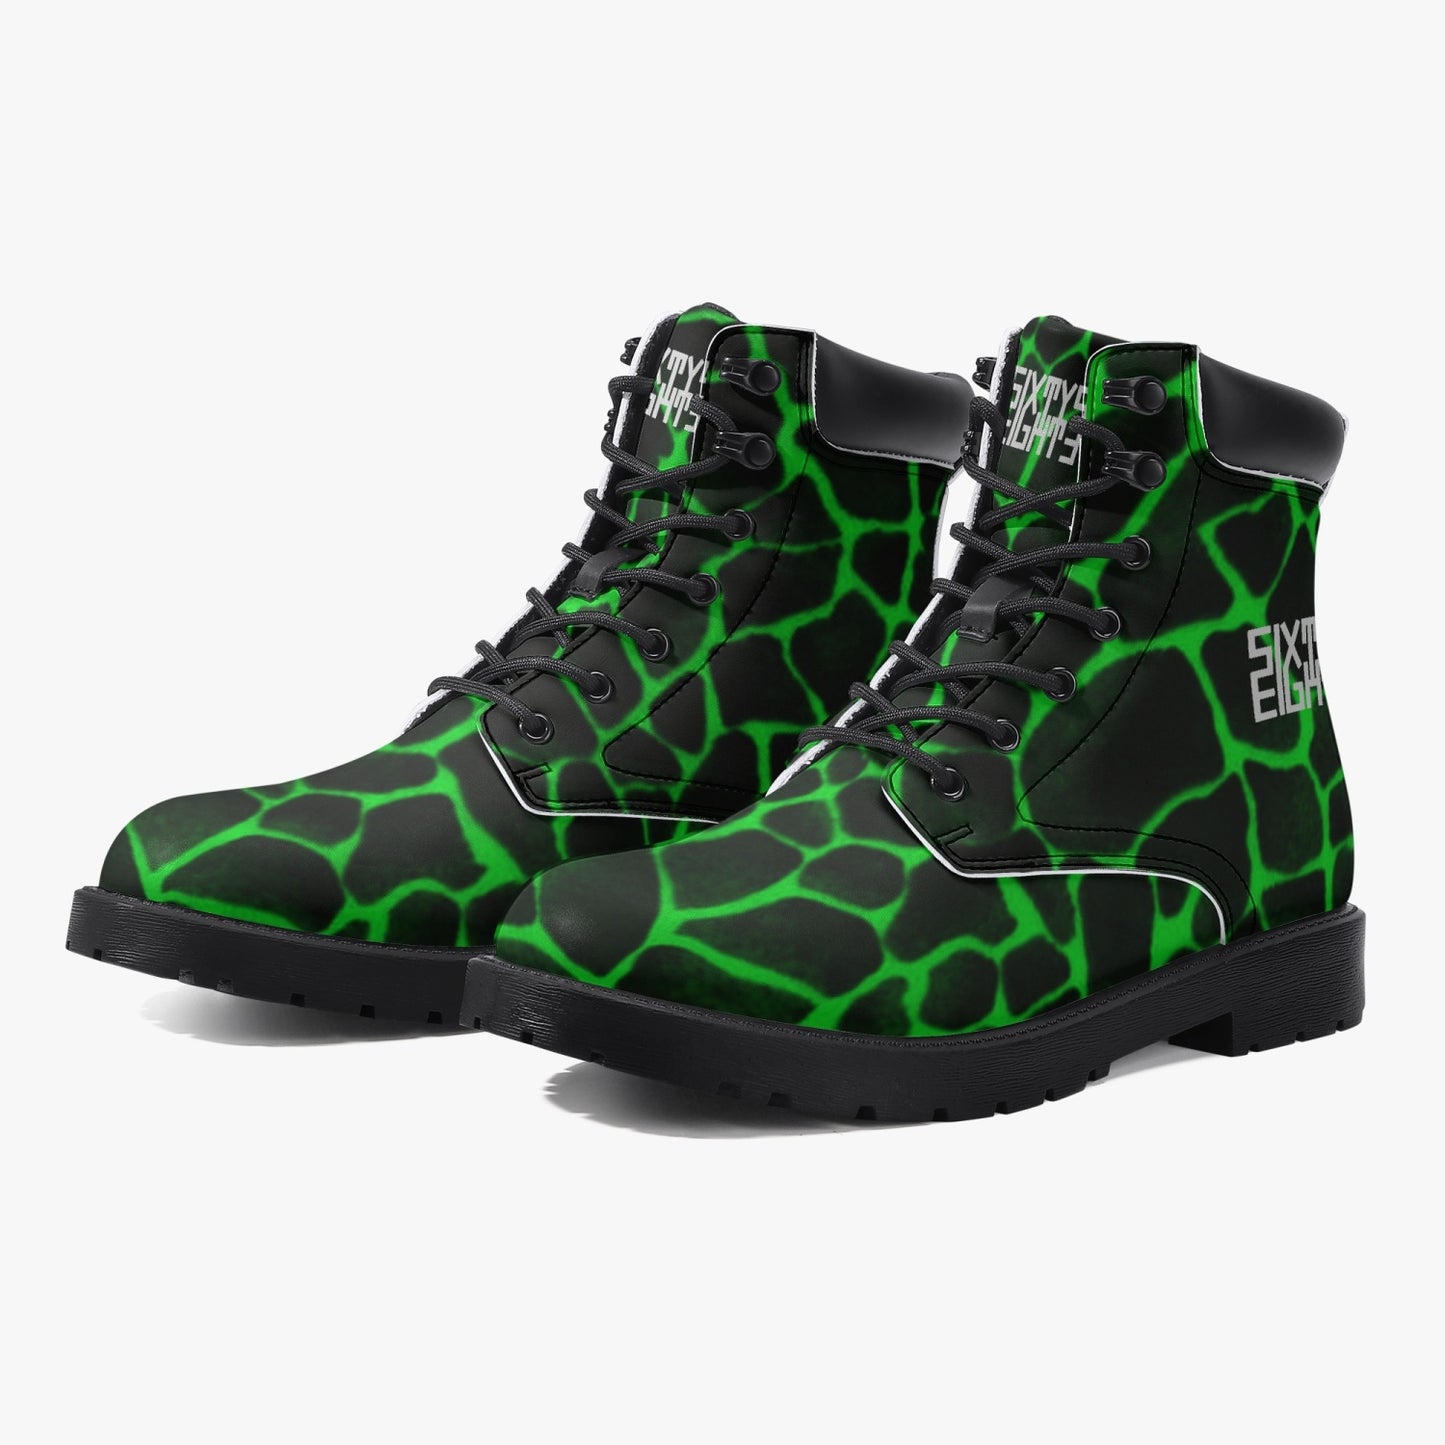 Sixty Eight 93 Logo White Boa Black Lime Leather Boots